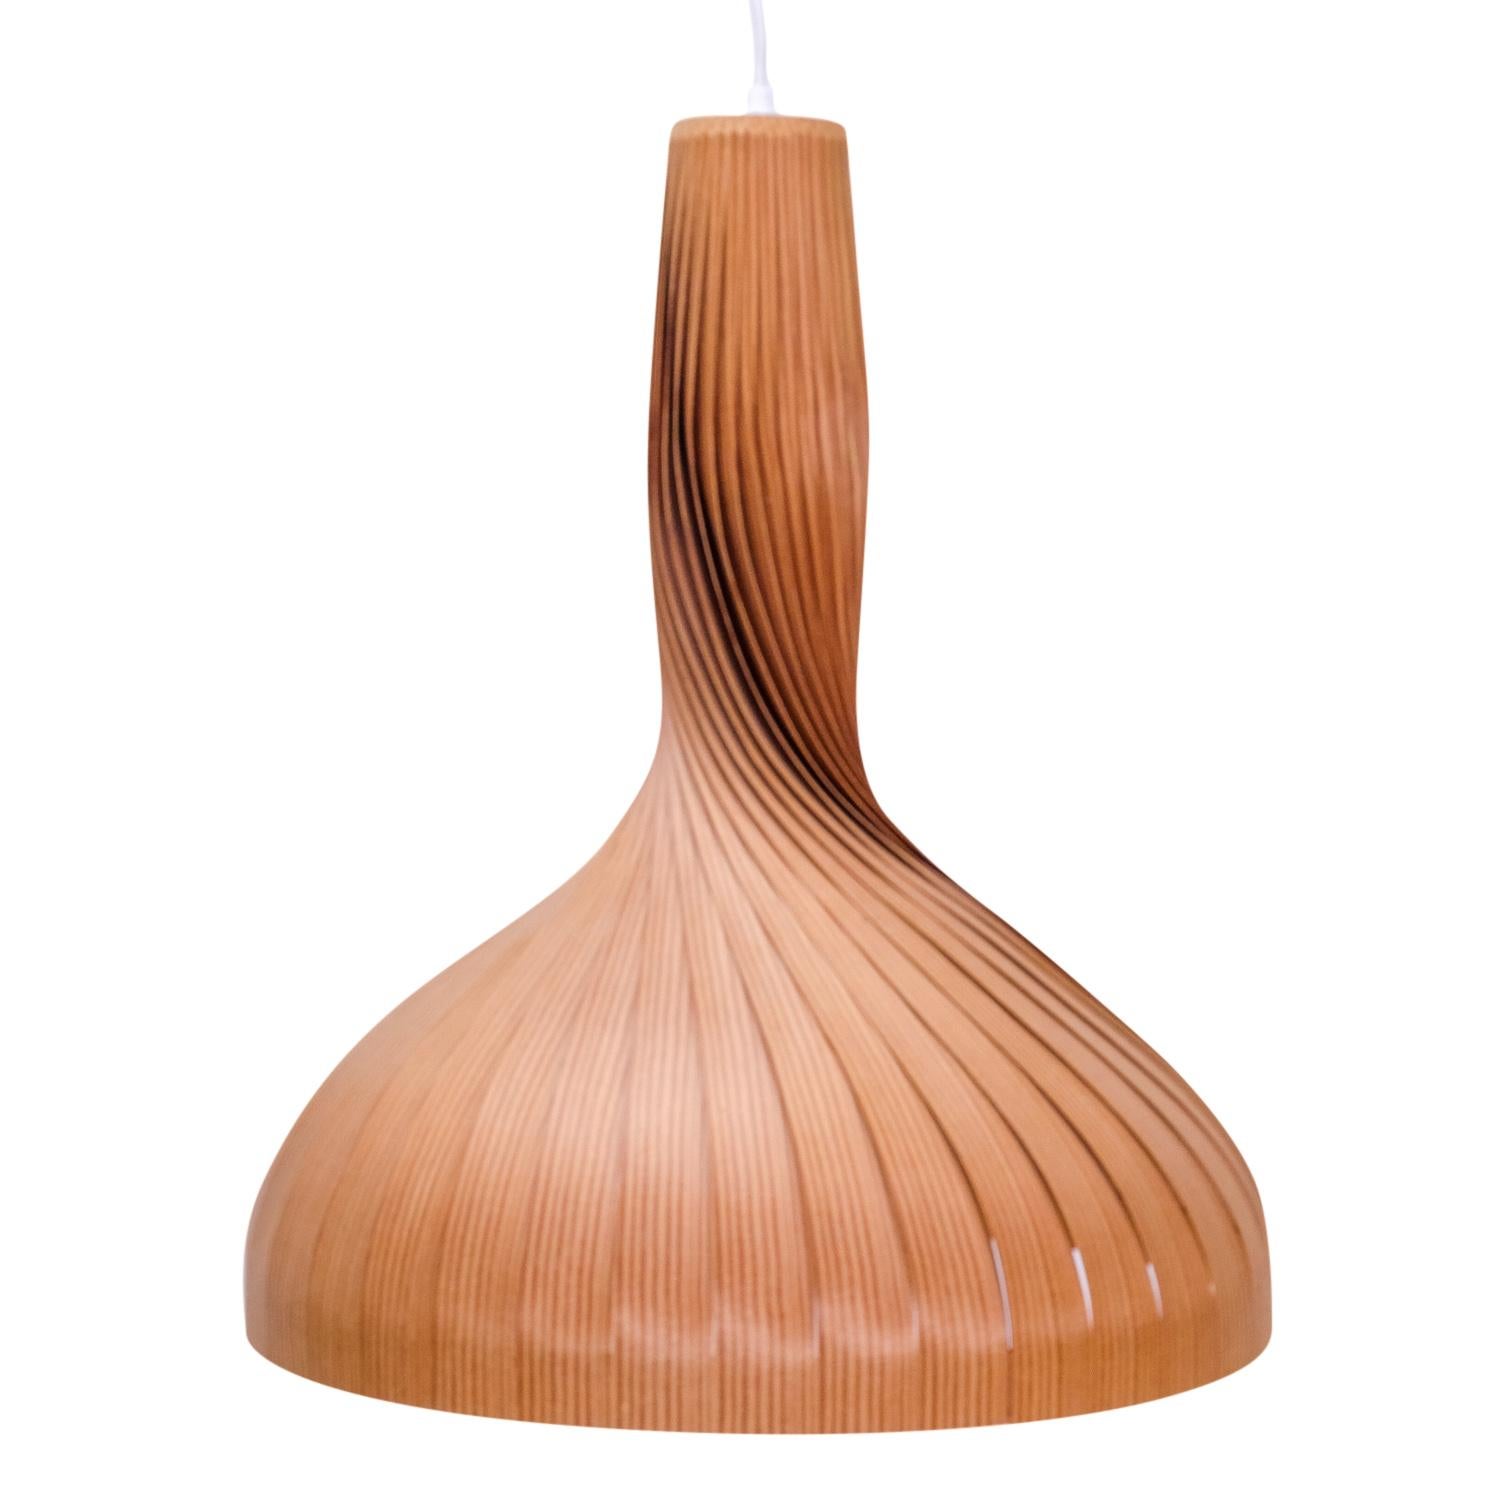 Vintage pendant produced by AB Markaryd, Sweden, design Hans-Agne Jakobsson:

Whether these lamps are turned on or off, they are real eye catchers in any interior, beautifully created with many layers of pinewood bent into a “swirl” that widens